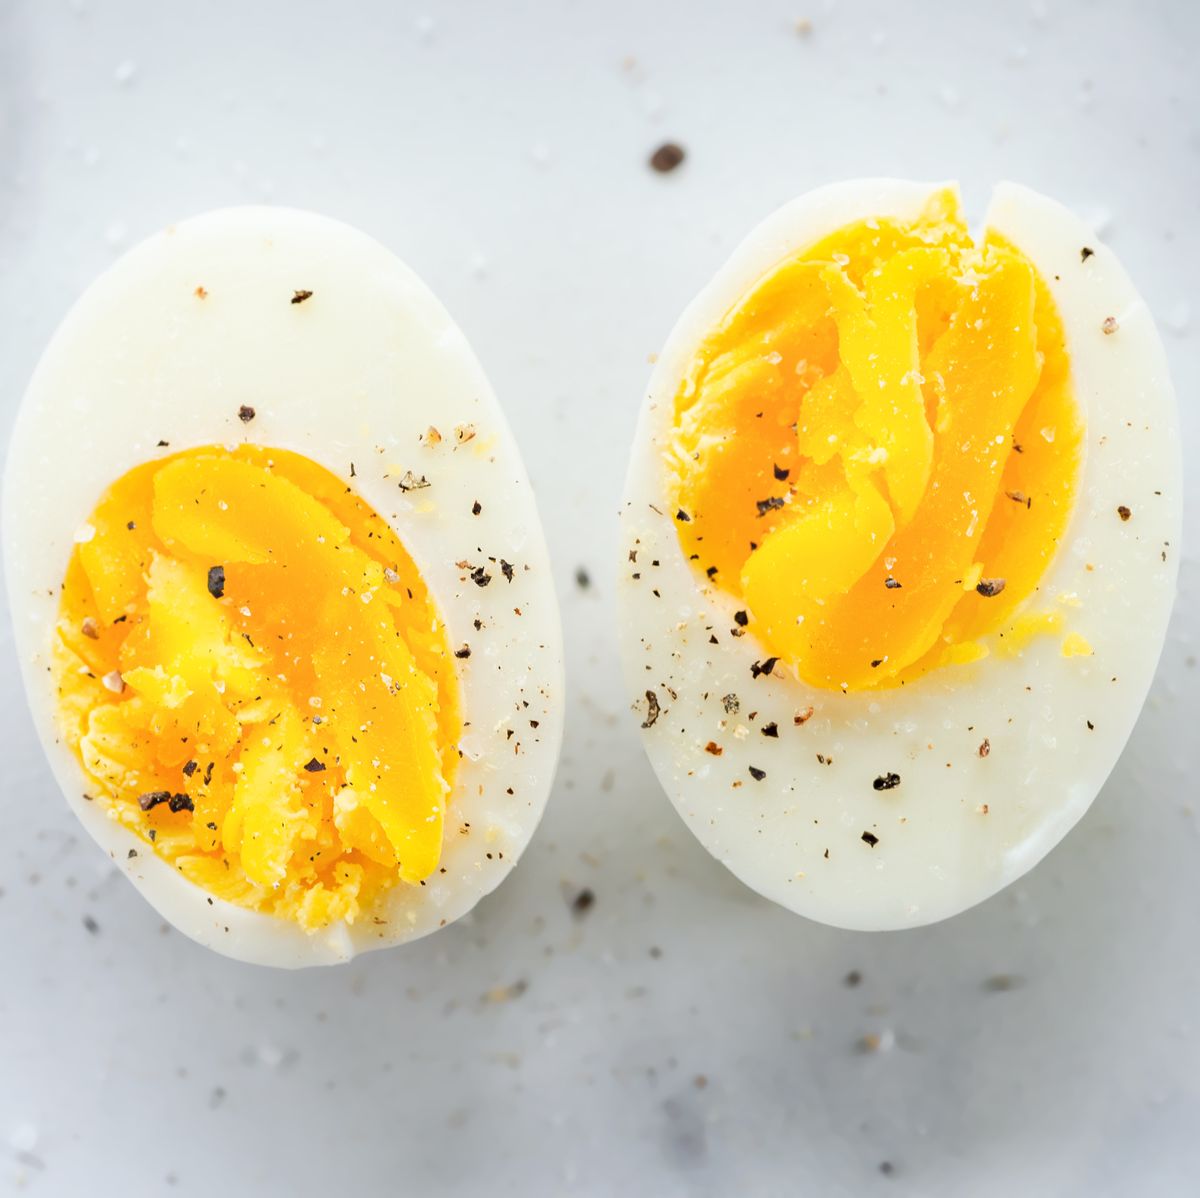 https://hips.hearstapps.com/hmg-prod/images/how-to-make-perfect-hard-boiled-eggs-640b64273255a.jpg?crop=0.764xw:1.00xh;0.119xw,0&resize=1200:*